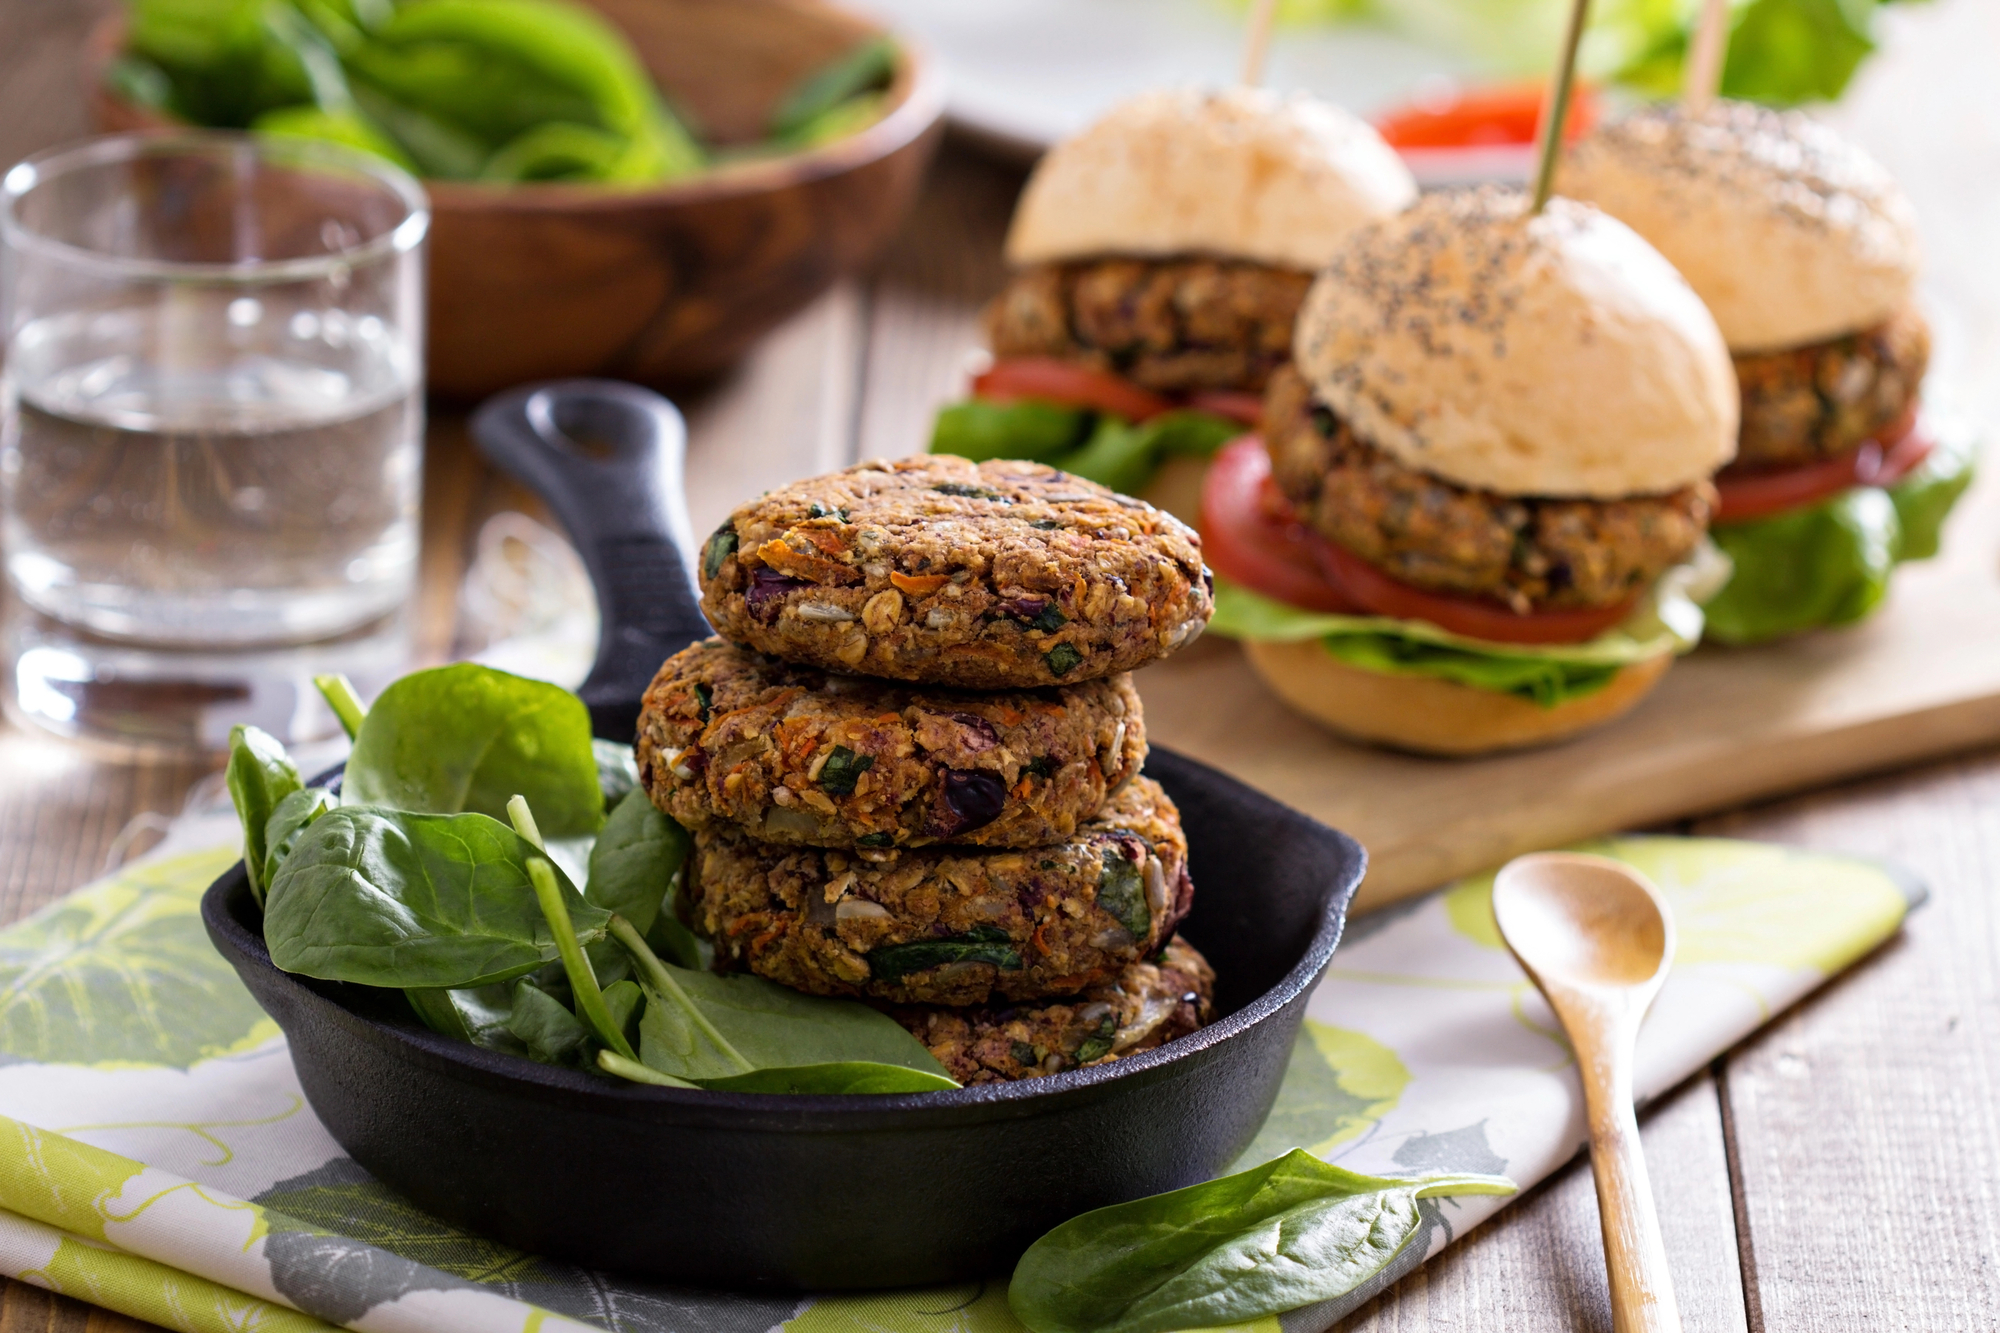 Veggie pulp burgers with lettuce and buns